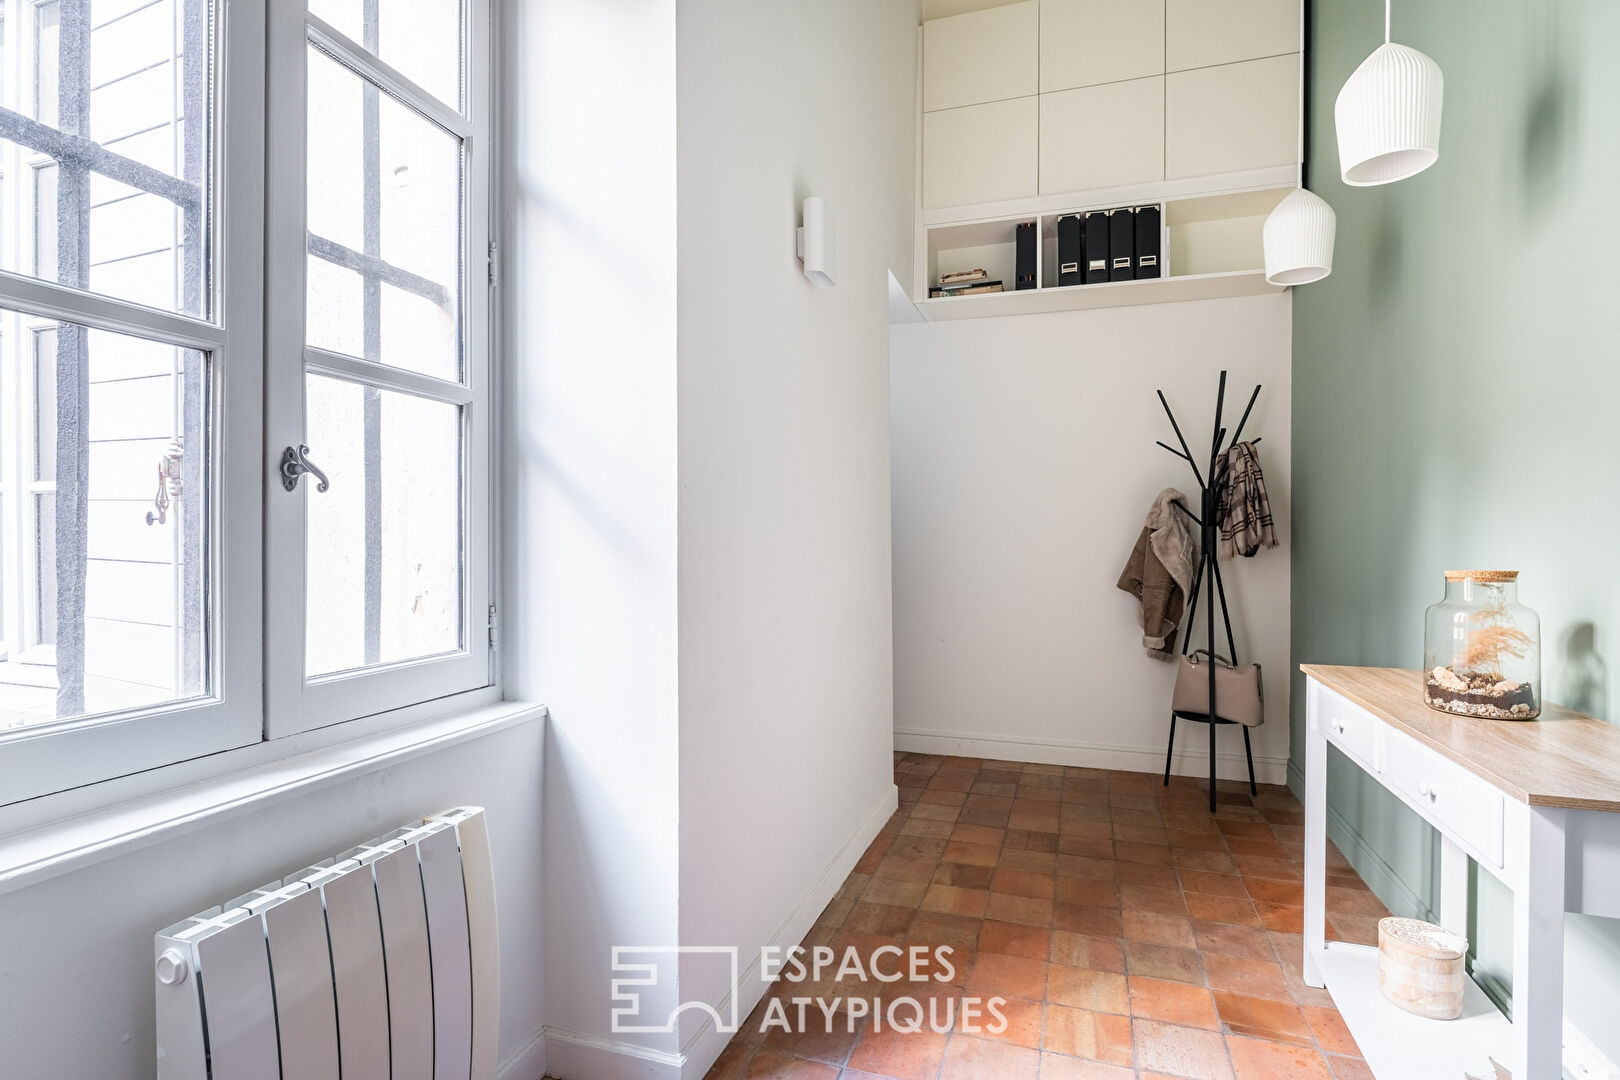 Apartment in a historic building in Villefranche sur Saône